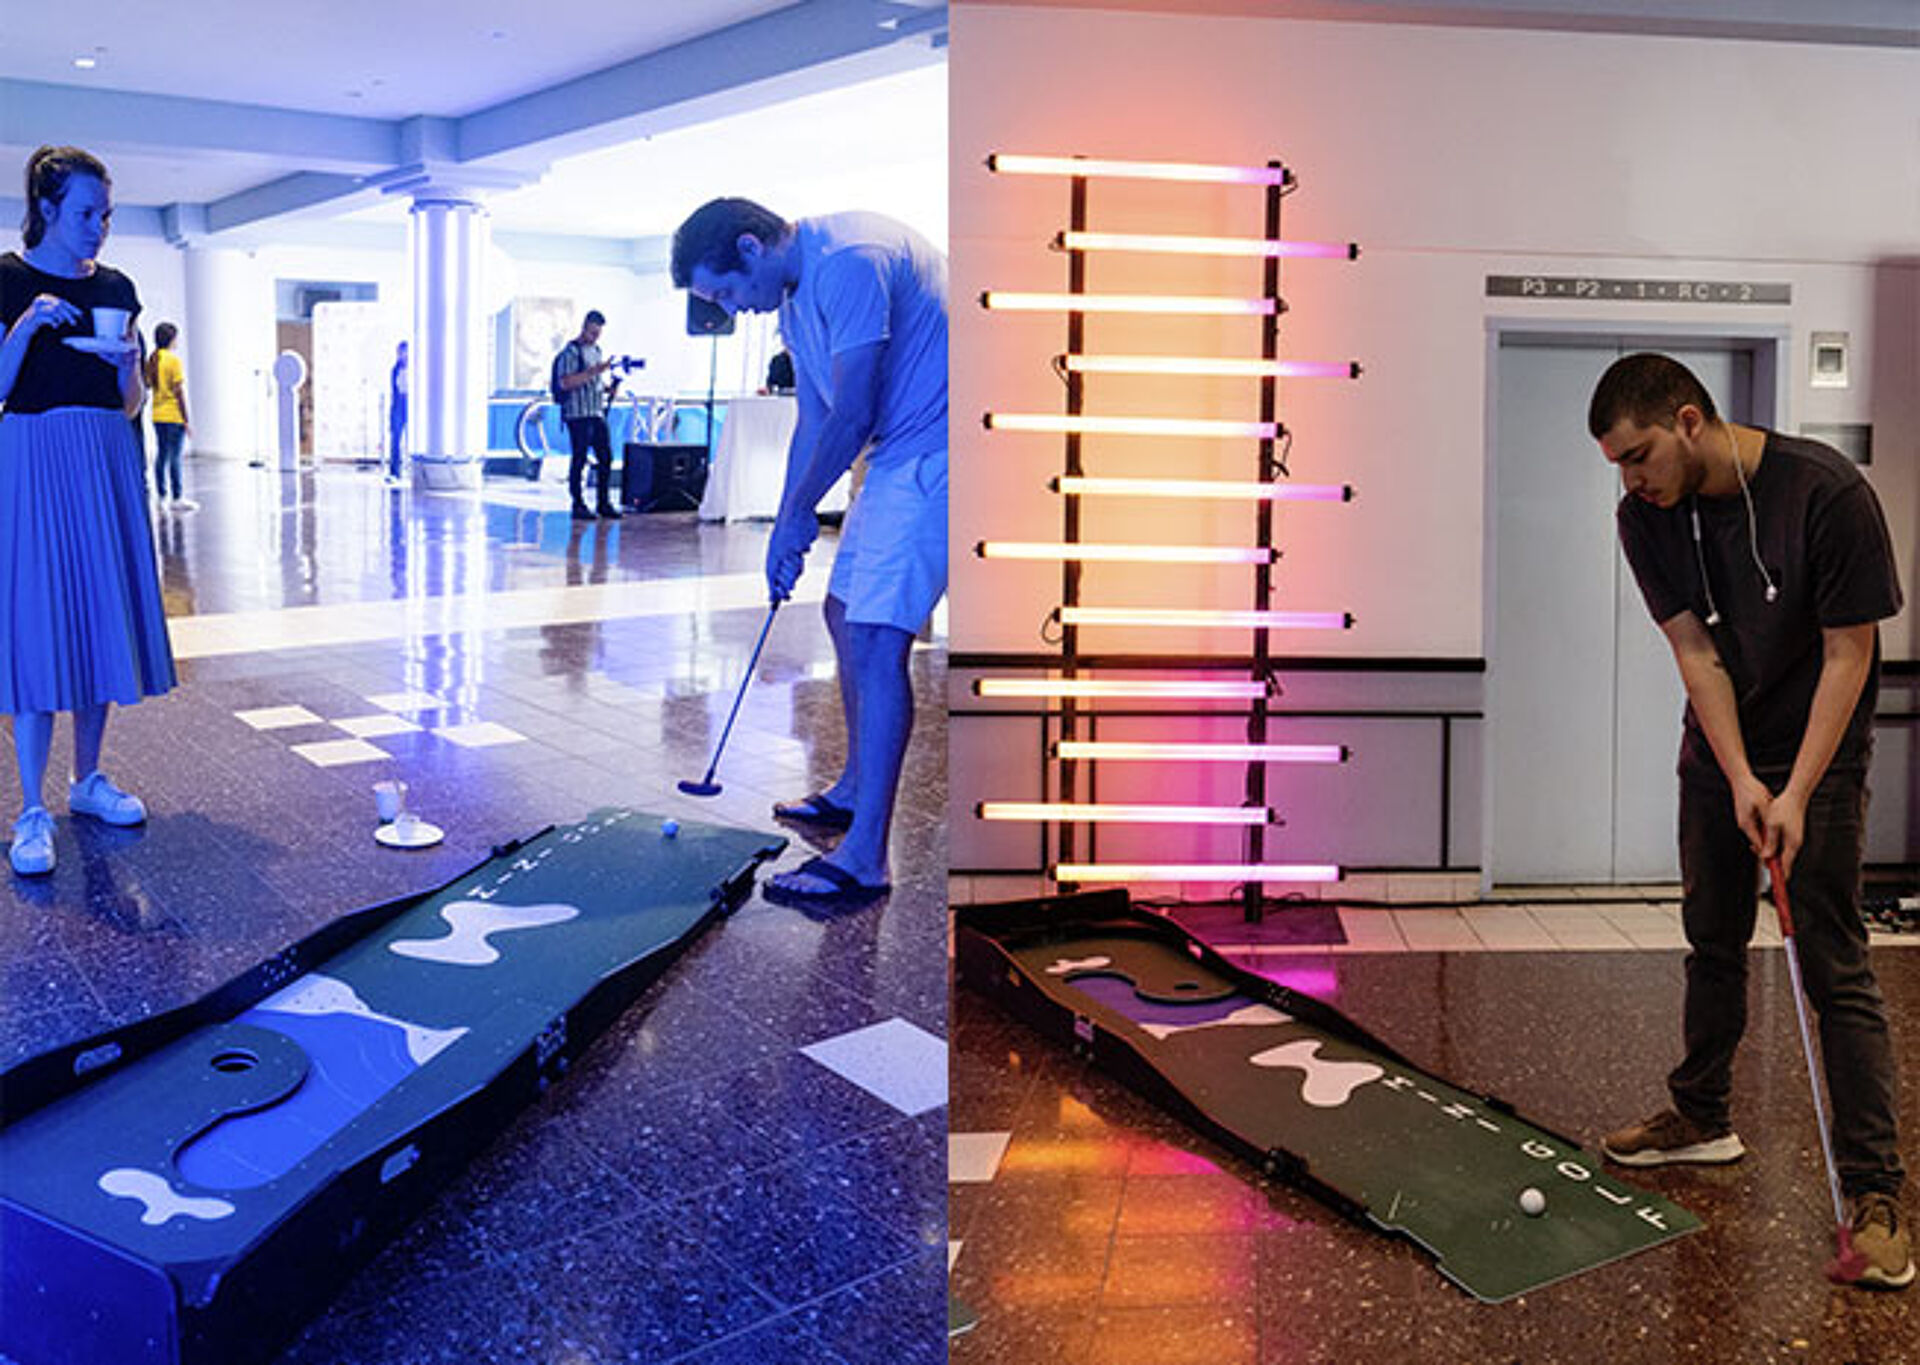 People playing mini golf indoors with a modern neon light installation in the background.